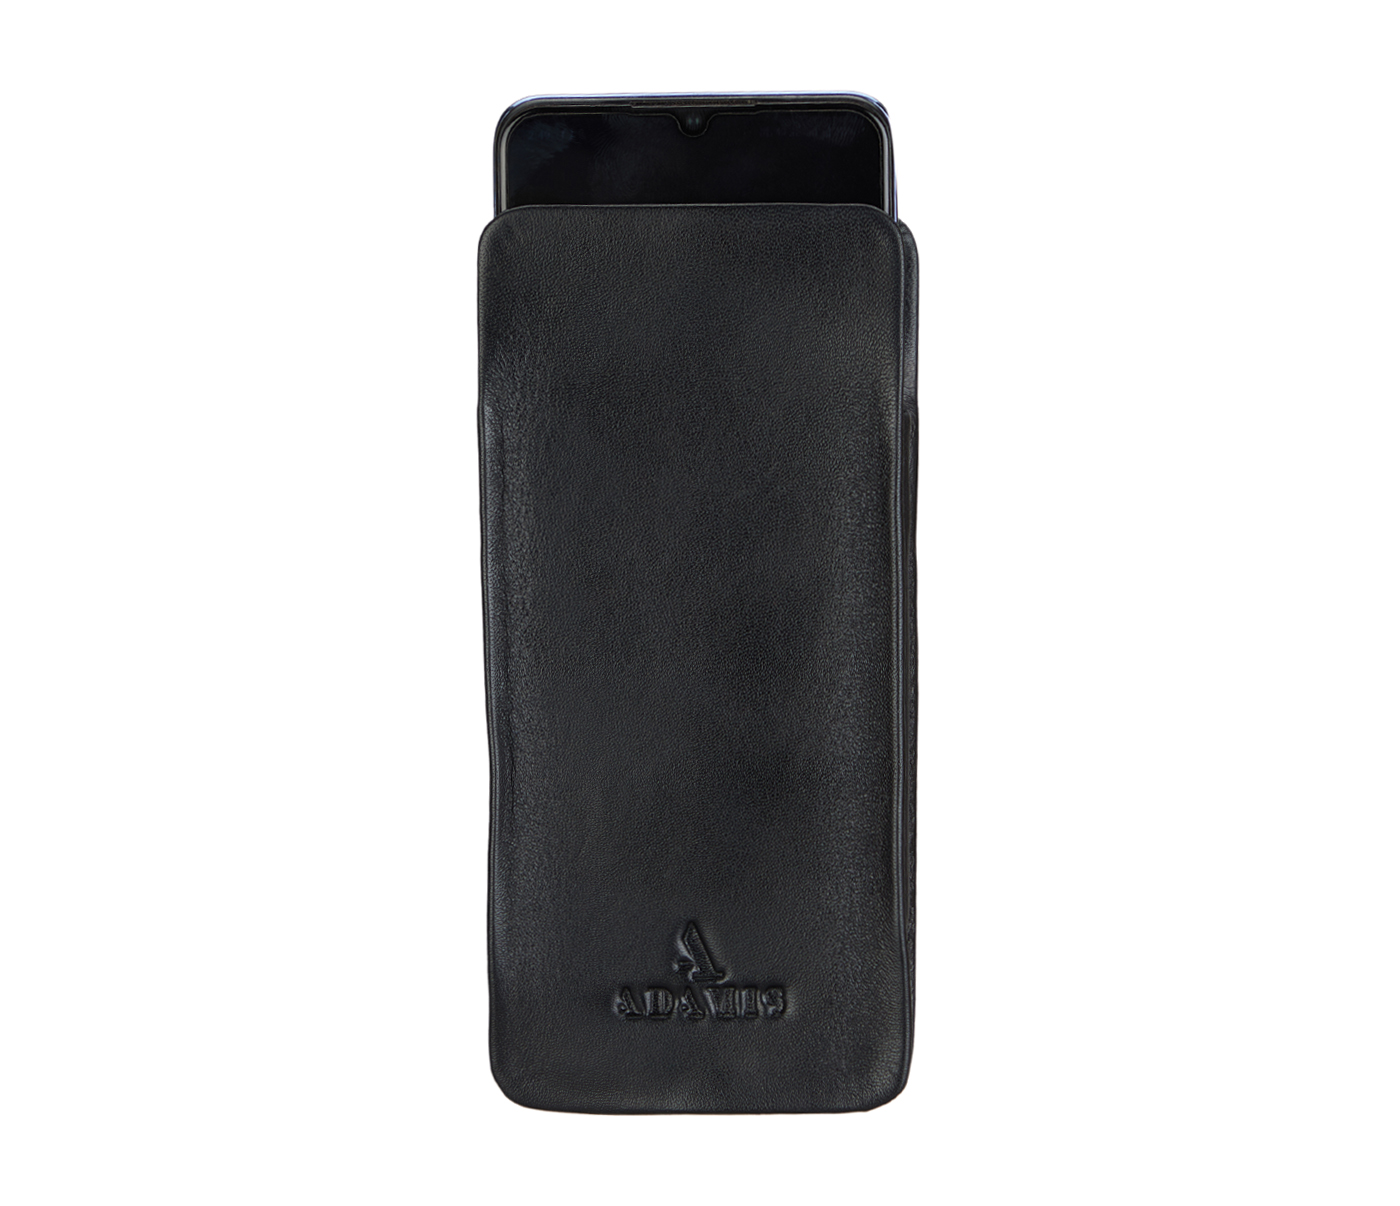 VW11--Soft stitch free spectacle case in Genuine Leather - Black